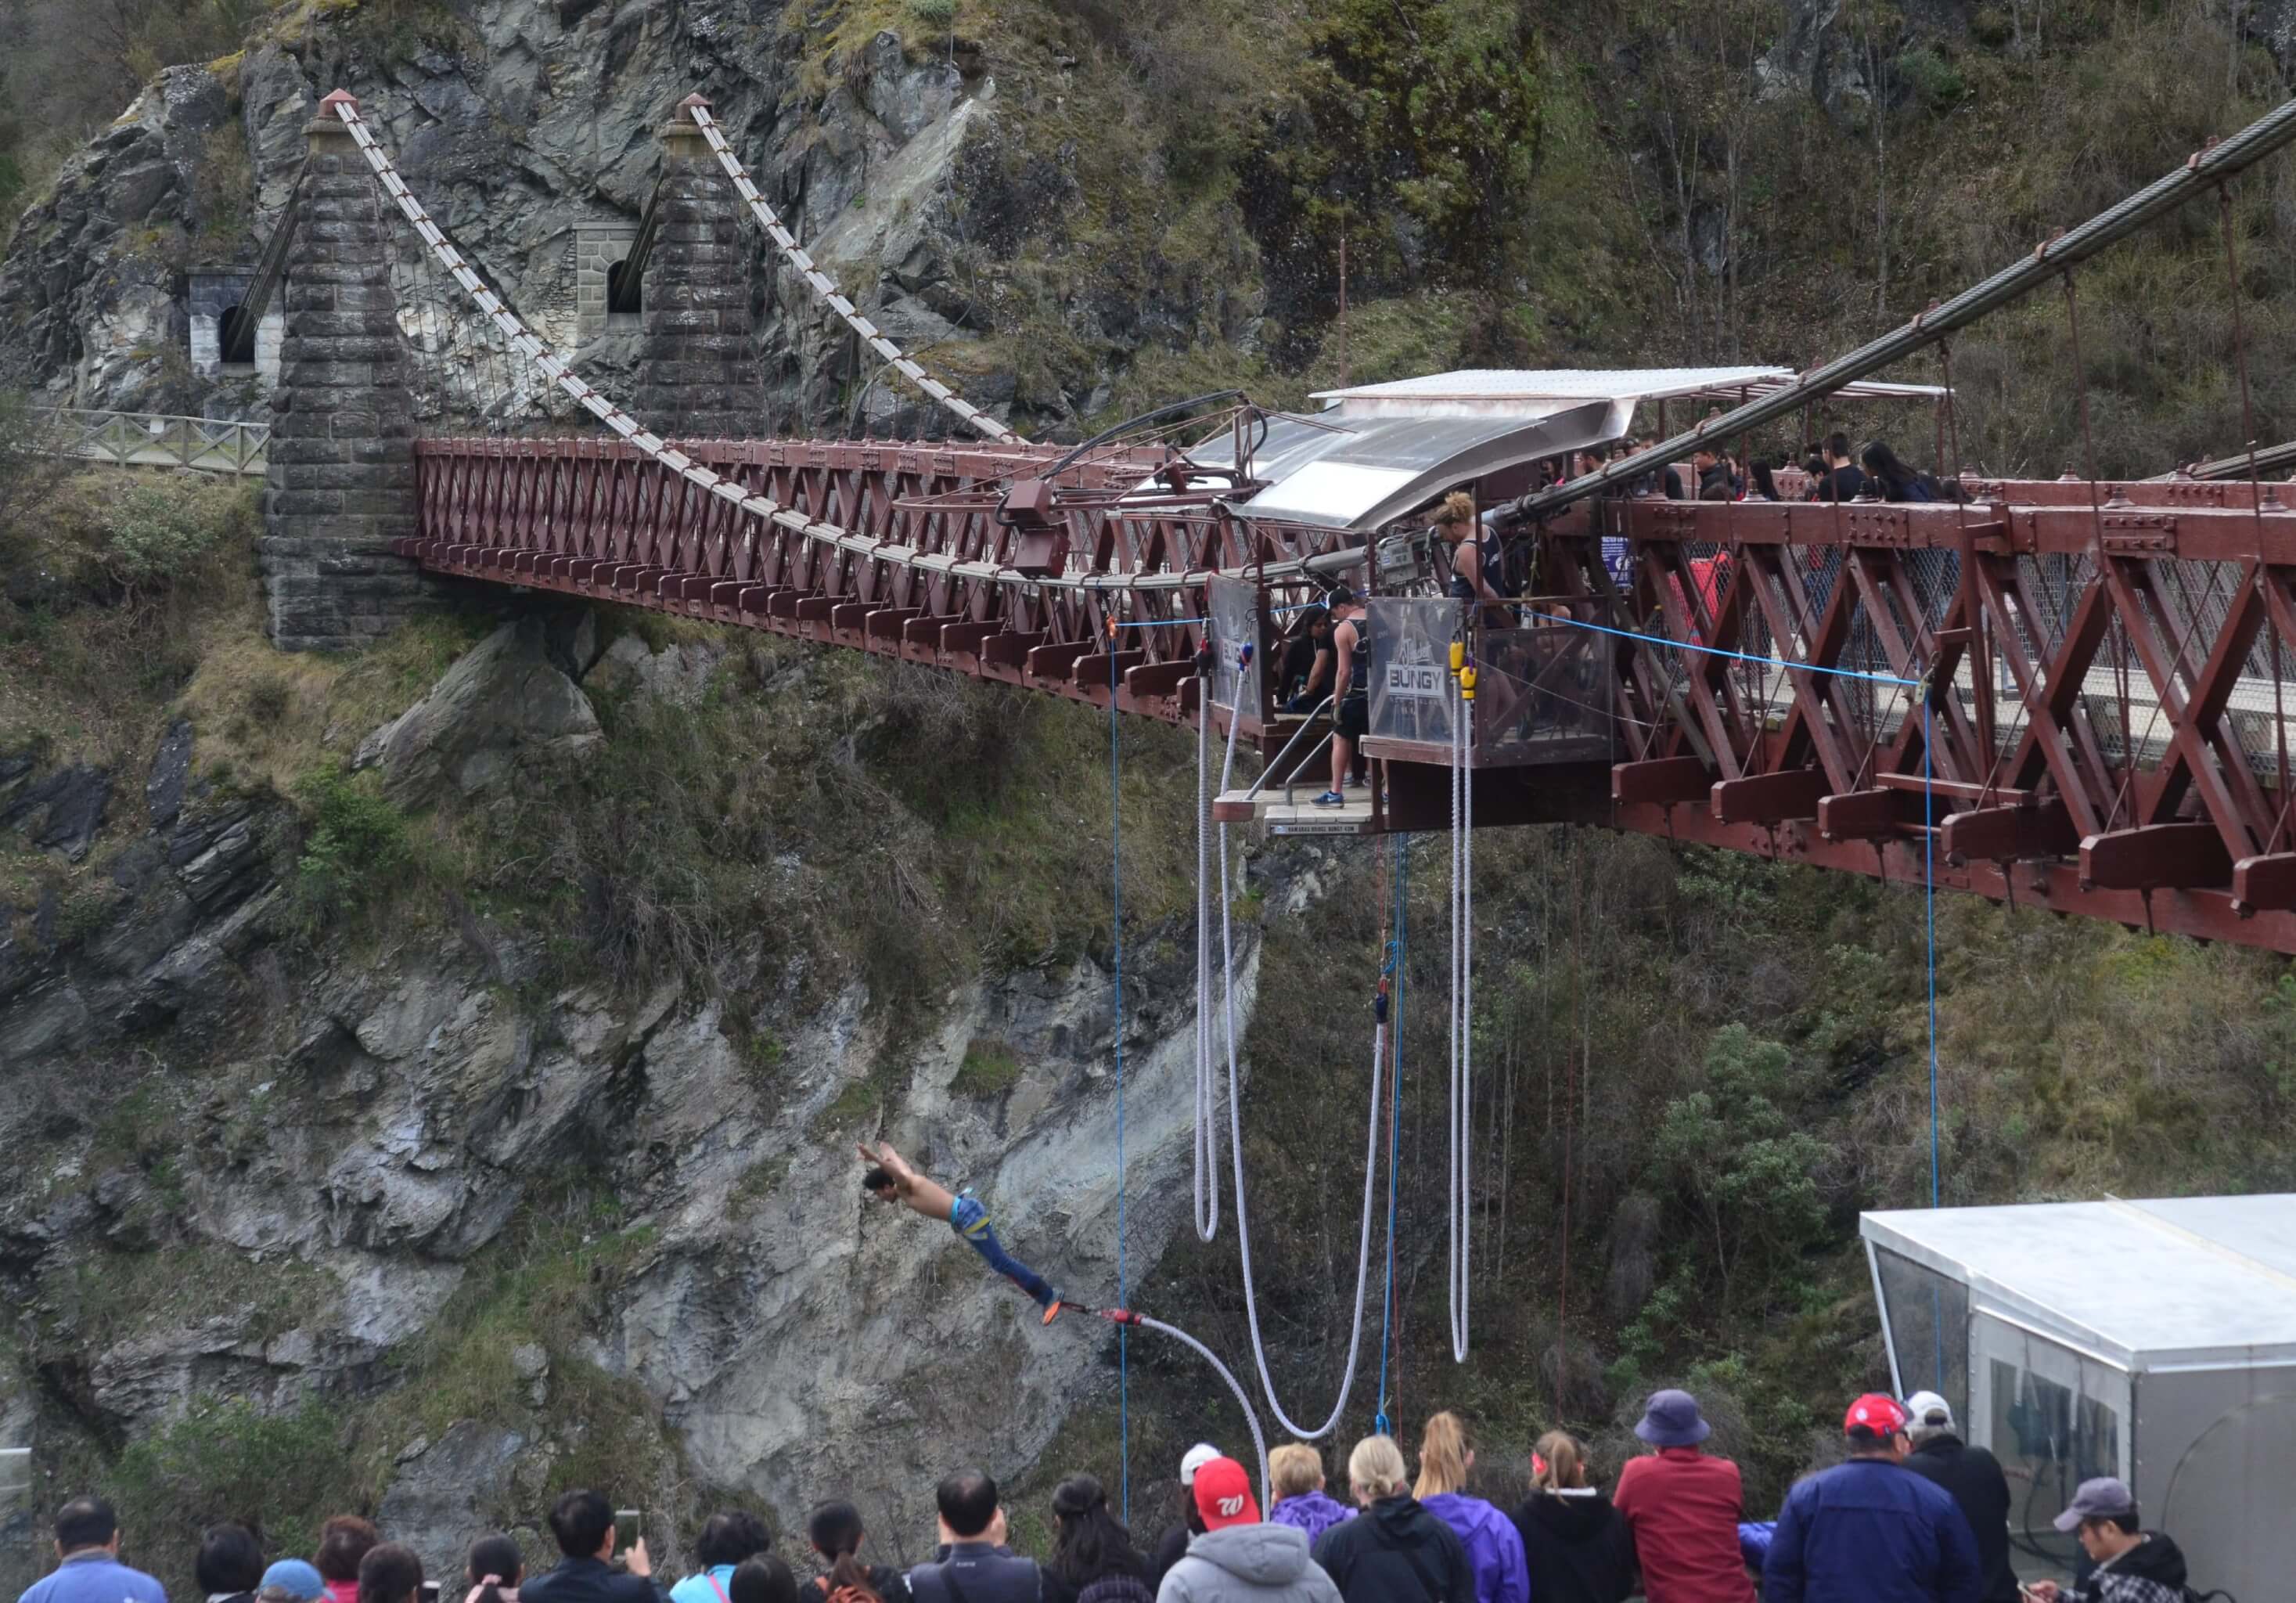 My final adventure in Queenstown was the Kawarau Bridge Bungy, happening at the place where Bungy jumping had first started